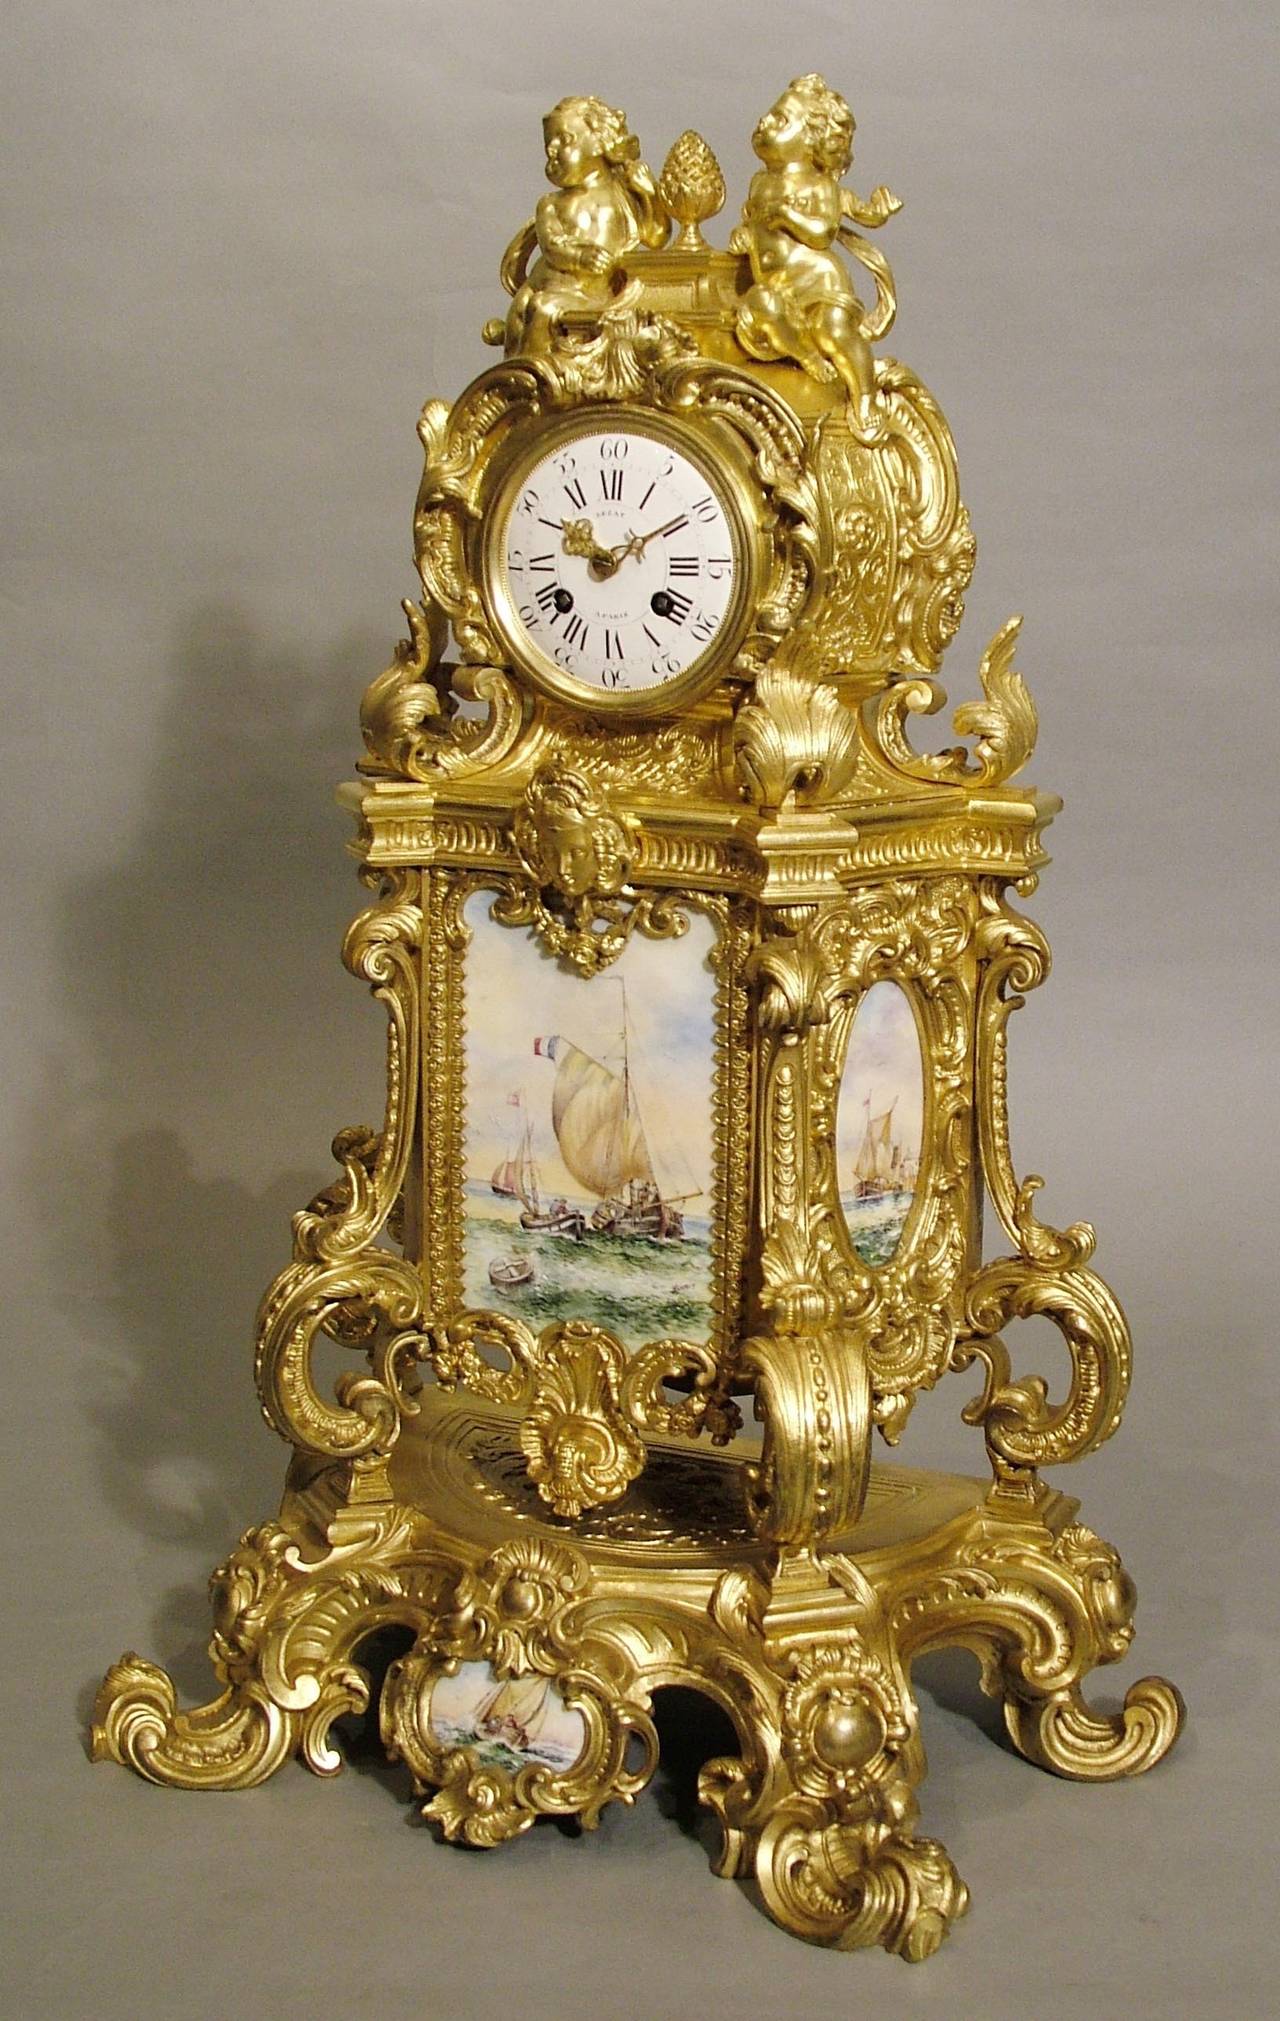 An impressive French mantel clock by LeCat of Paris.

Constructed in the Louis XV manner, the monumental gilt bronze framework housing hand-painted porcelain plaques of nautical scenes, signed ‘Venoit; rising from scrolled feet, the exuberantly